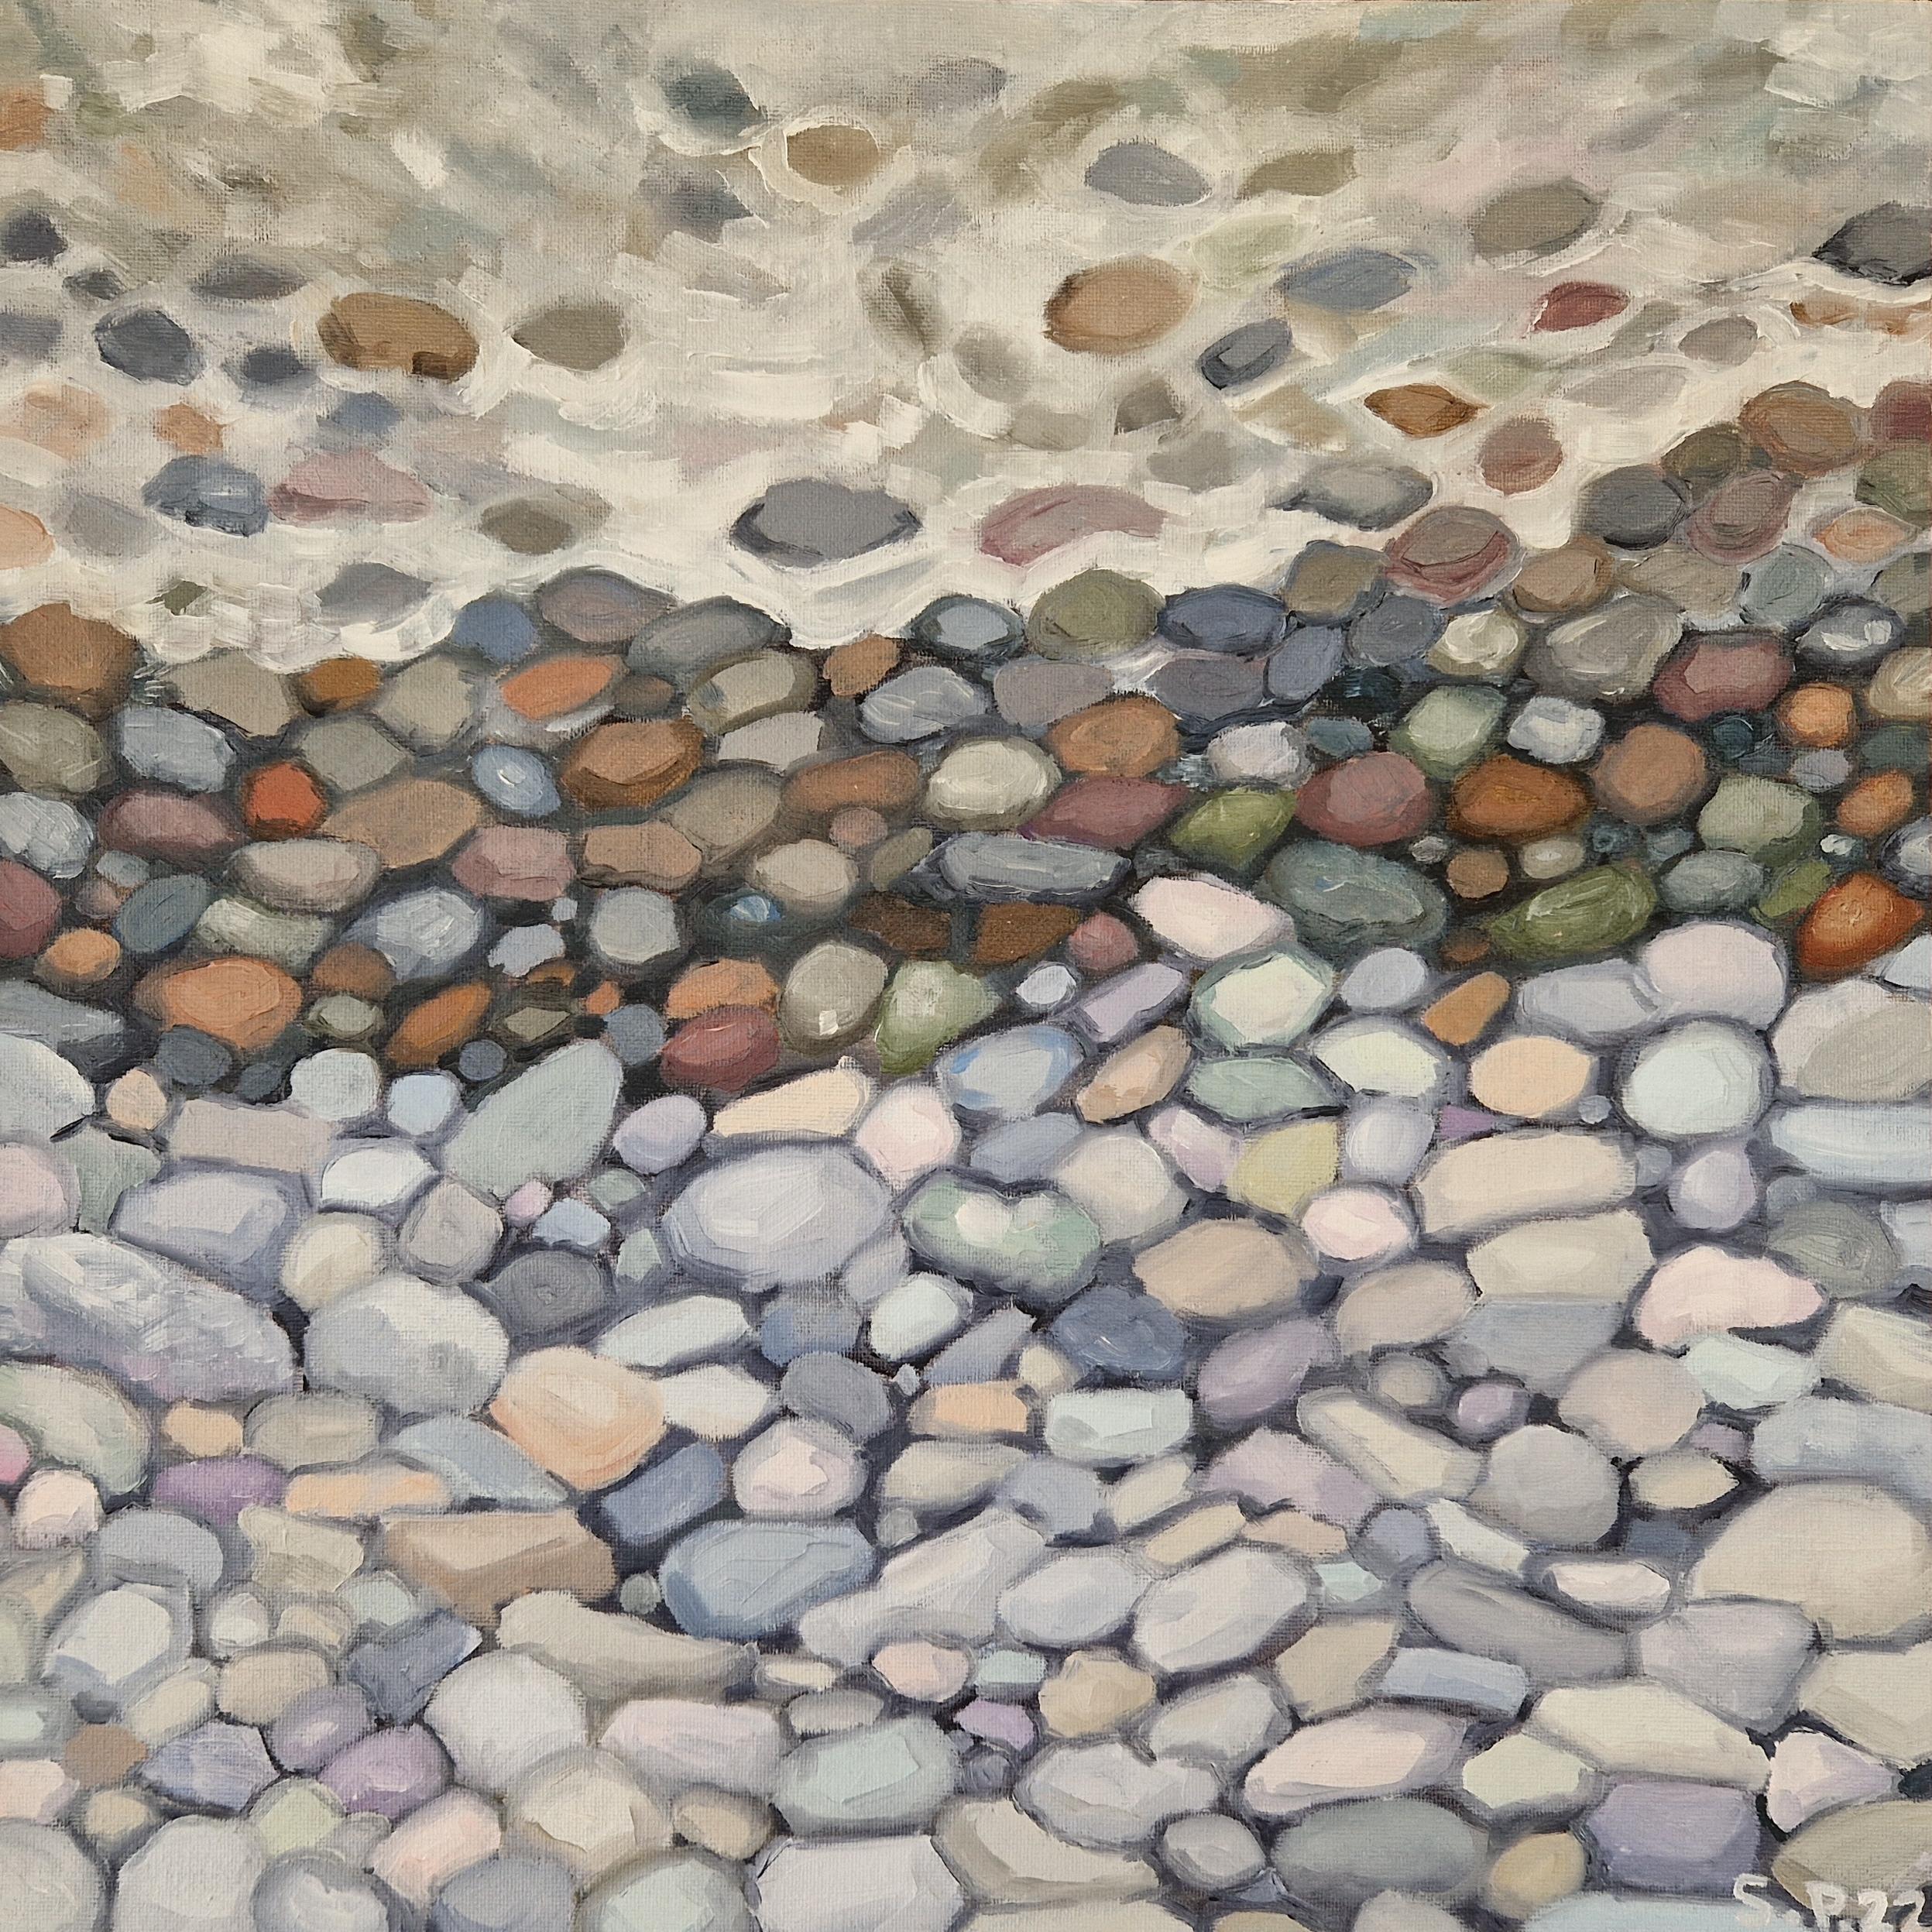 The painting 'Pebbles 2'.